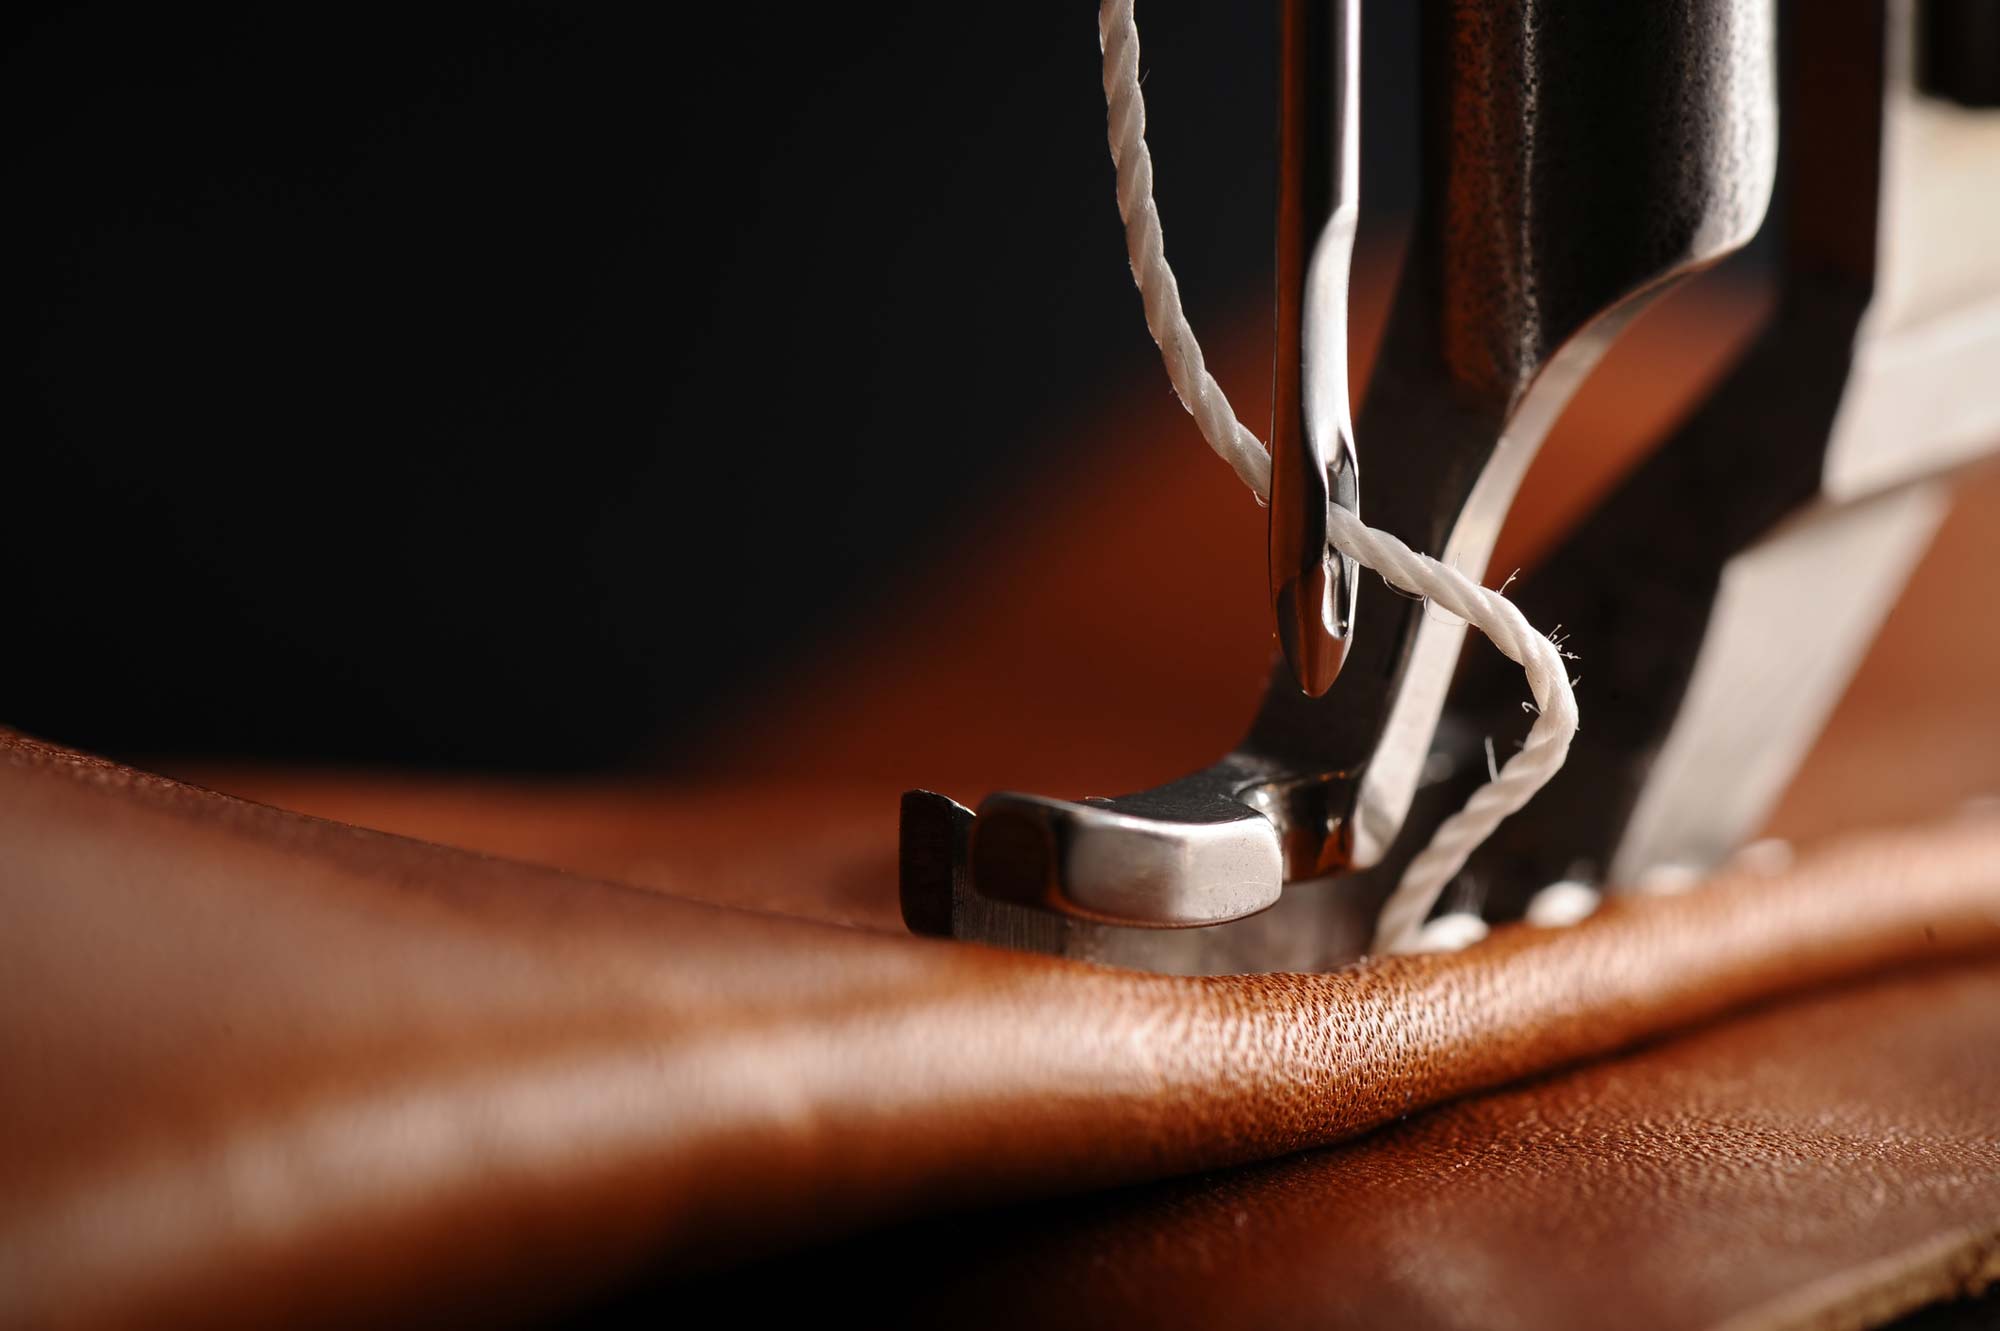 Machine sewing through leather.